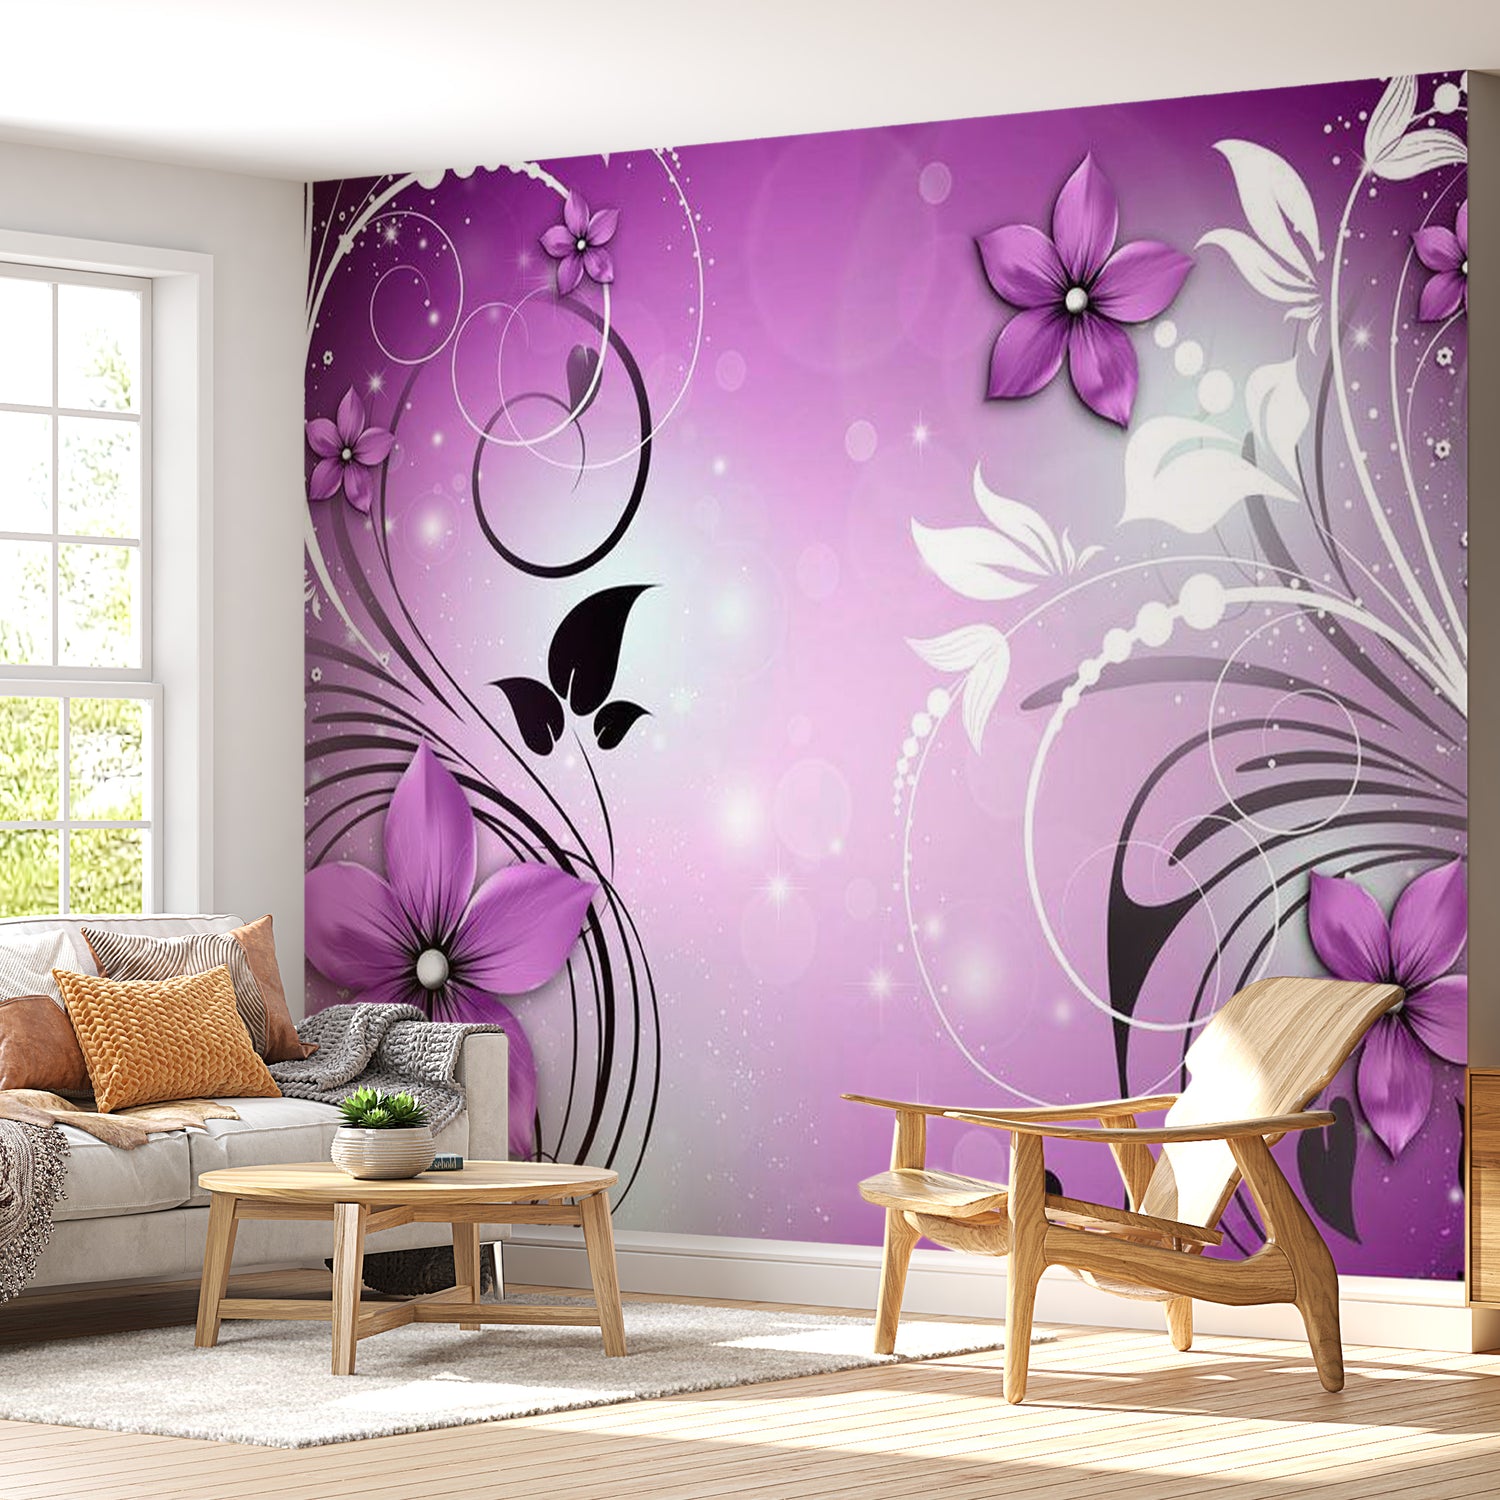 Peel & Stick Floral Wall Mural - Heather Dance - Removable Wall Decals